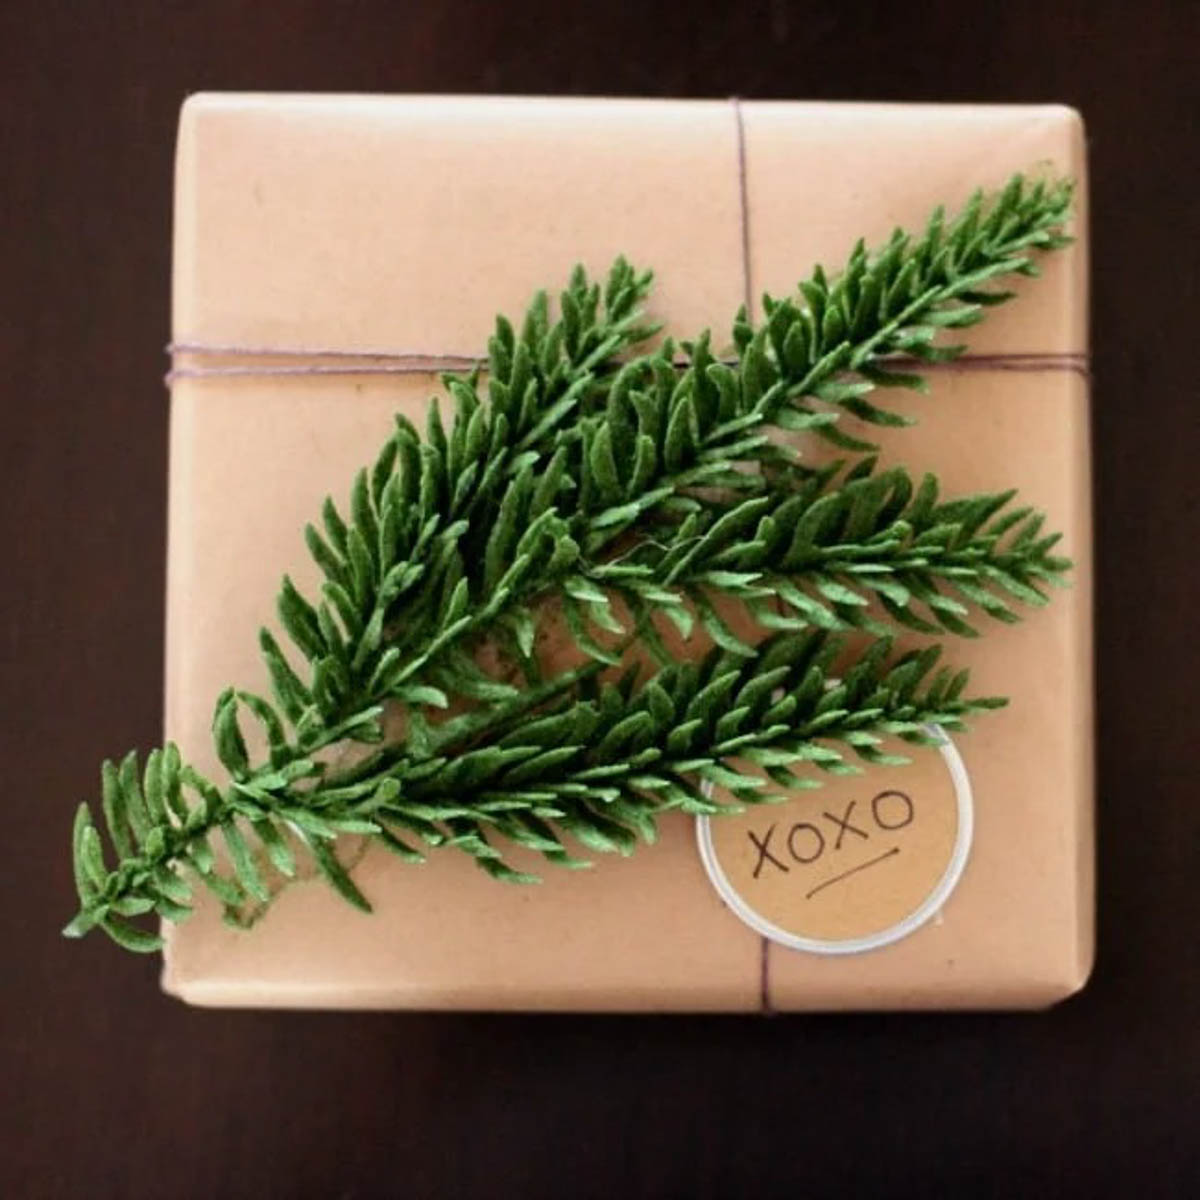 rust gift wrapped present with greenery and xoxo tag